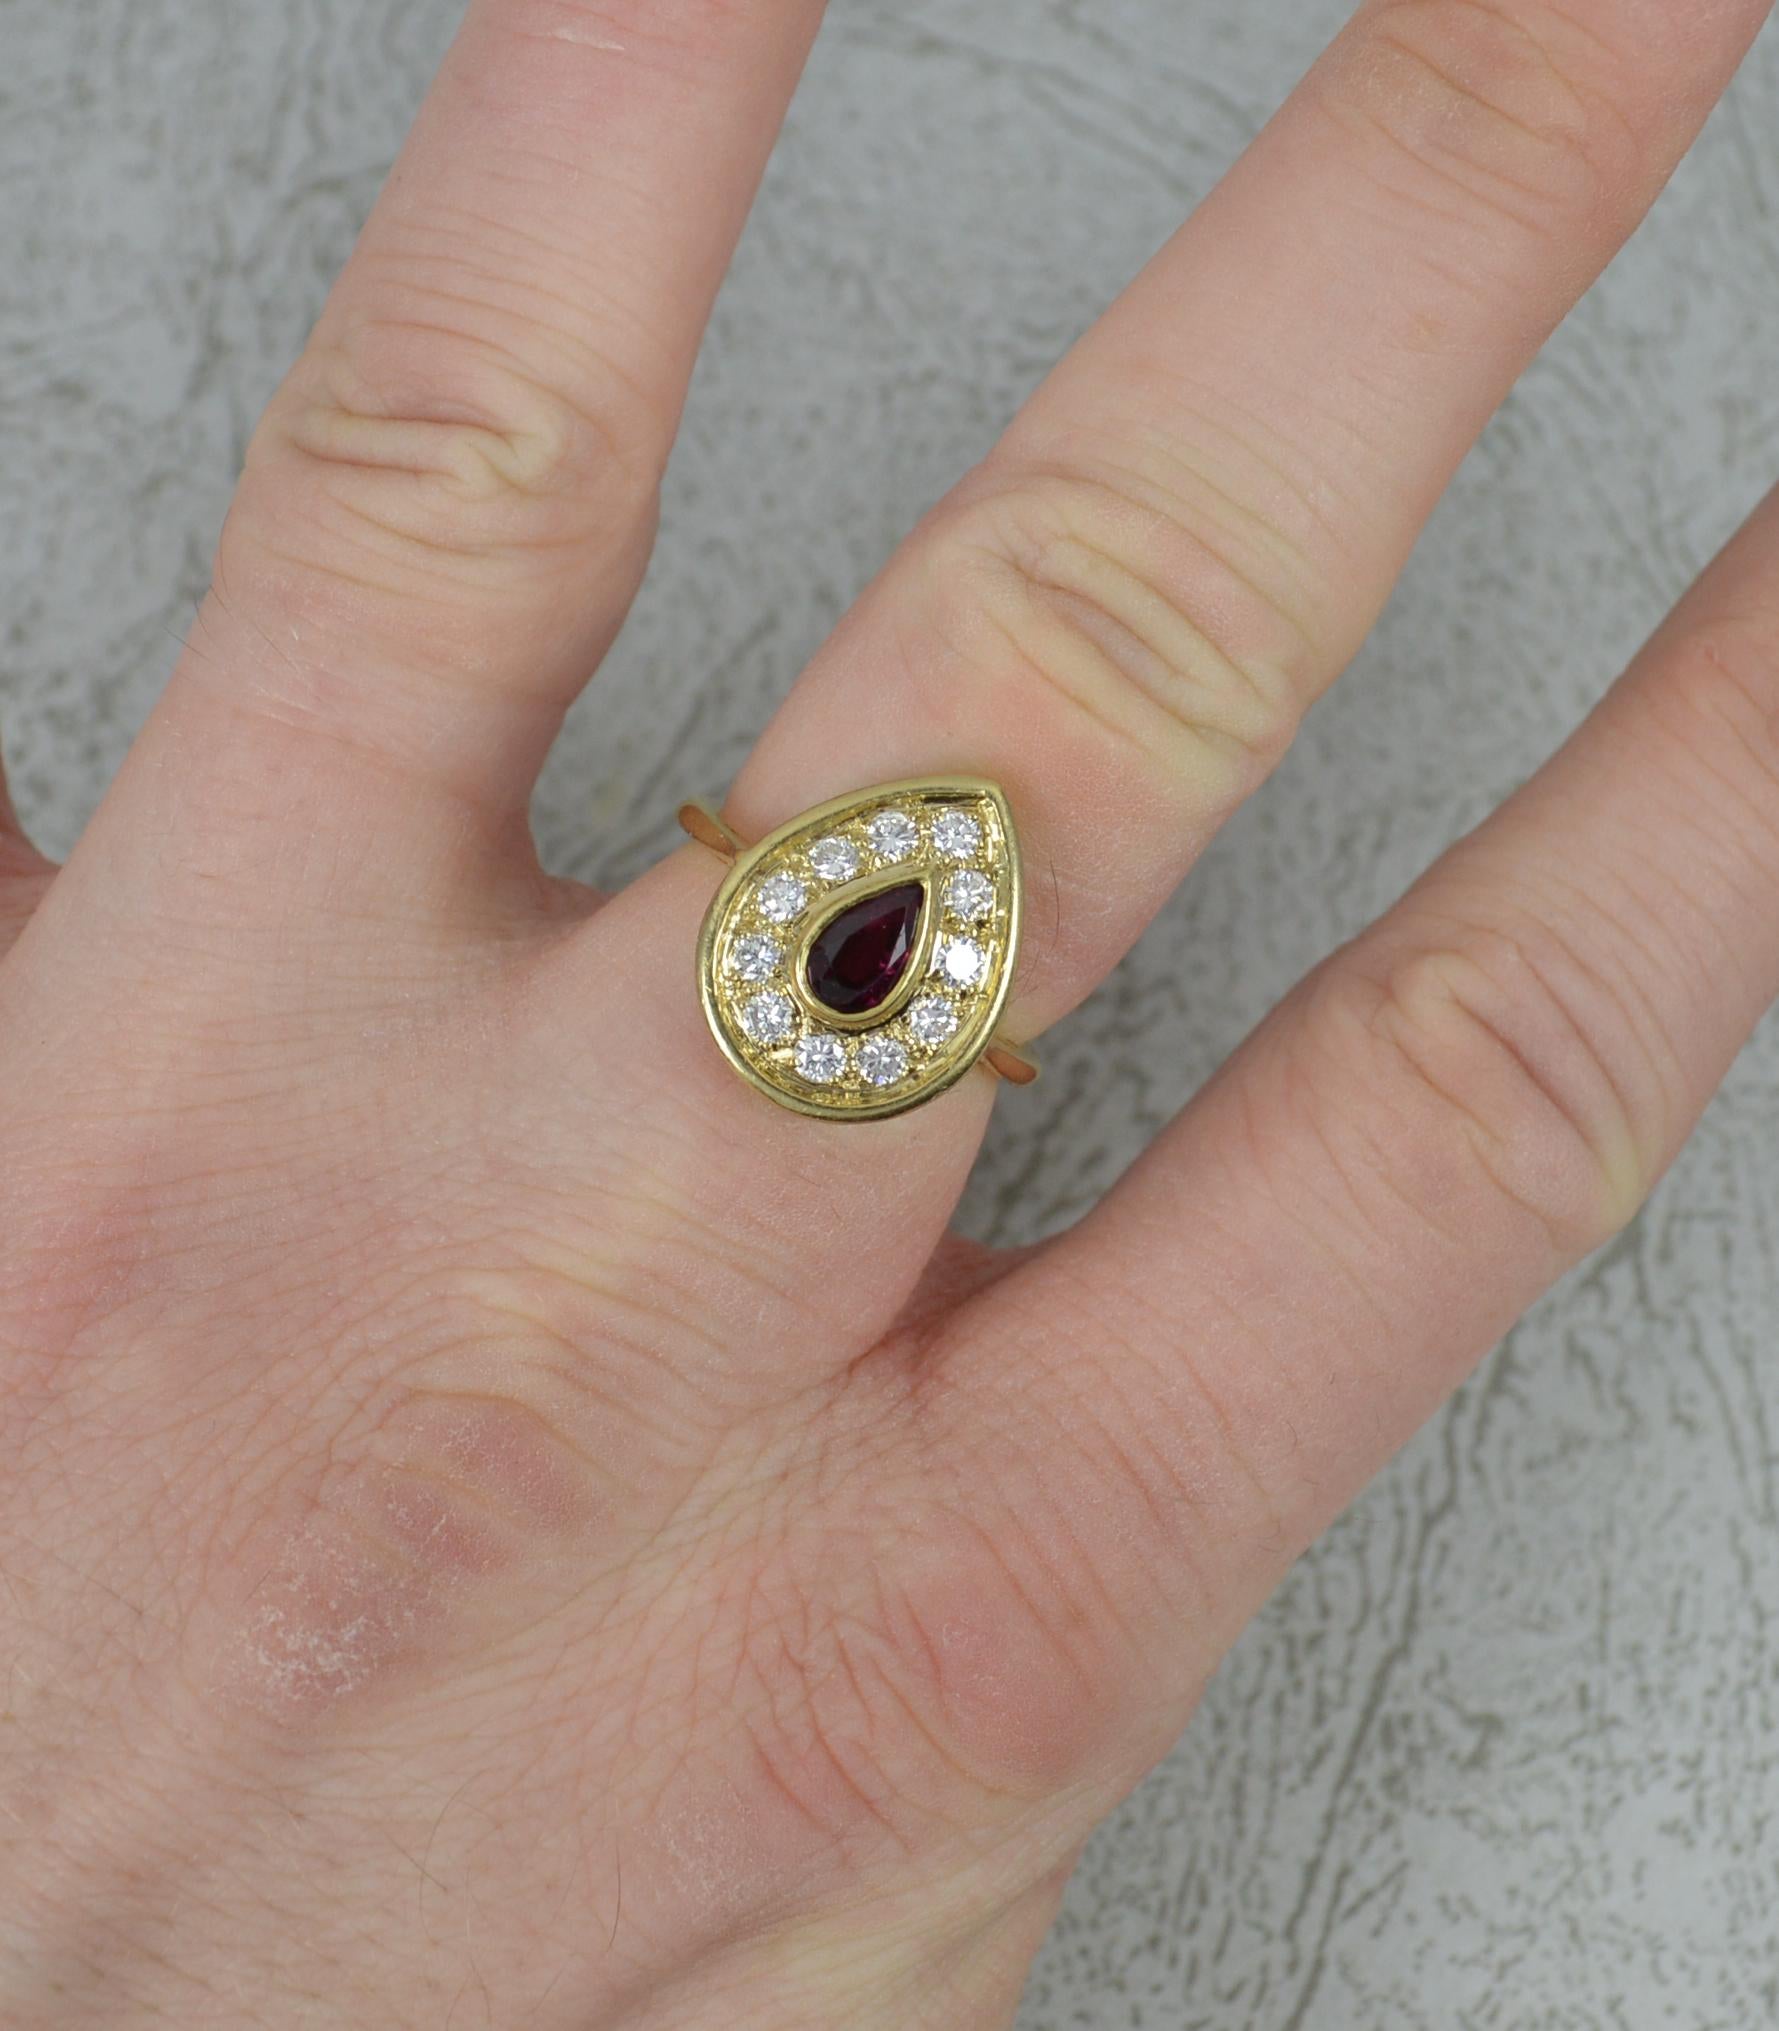 A striking cluster ring.
Solid 18 carat yellow gold shank.
Designed with a pear cut ruby to centre, full bezel setting. Surrounding are many round brilliant cut diamonds, 0.4 carats, vvs clarity f-g colour.
13mm x 17mm cluster head.

CONDITION ;